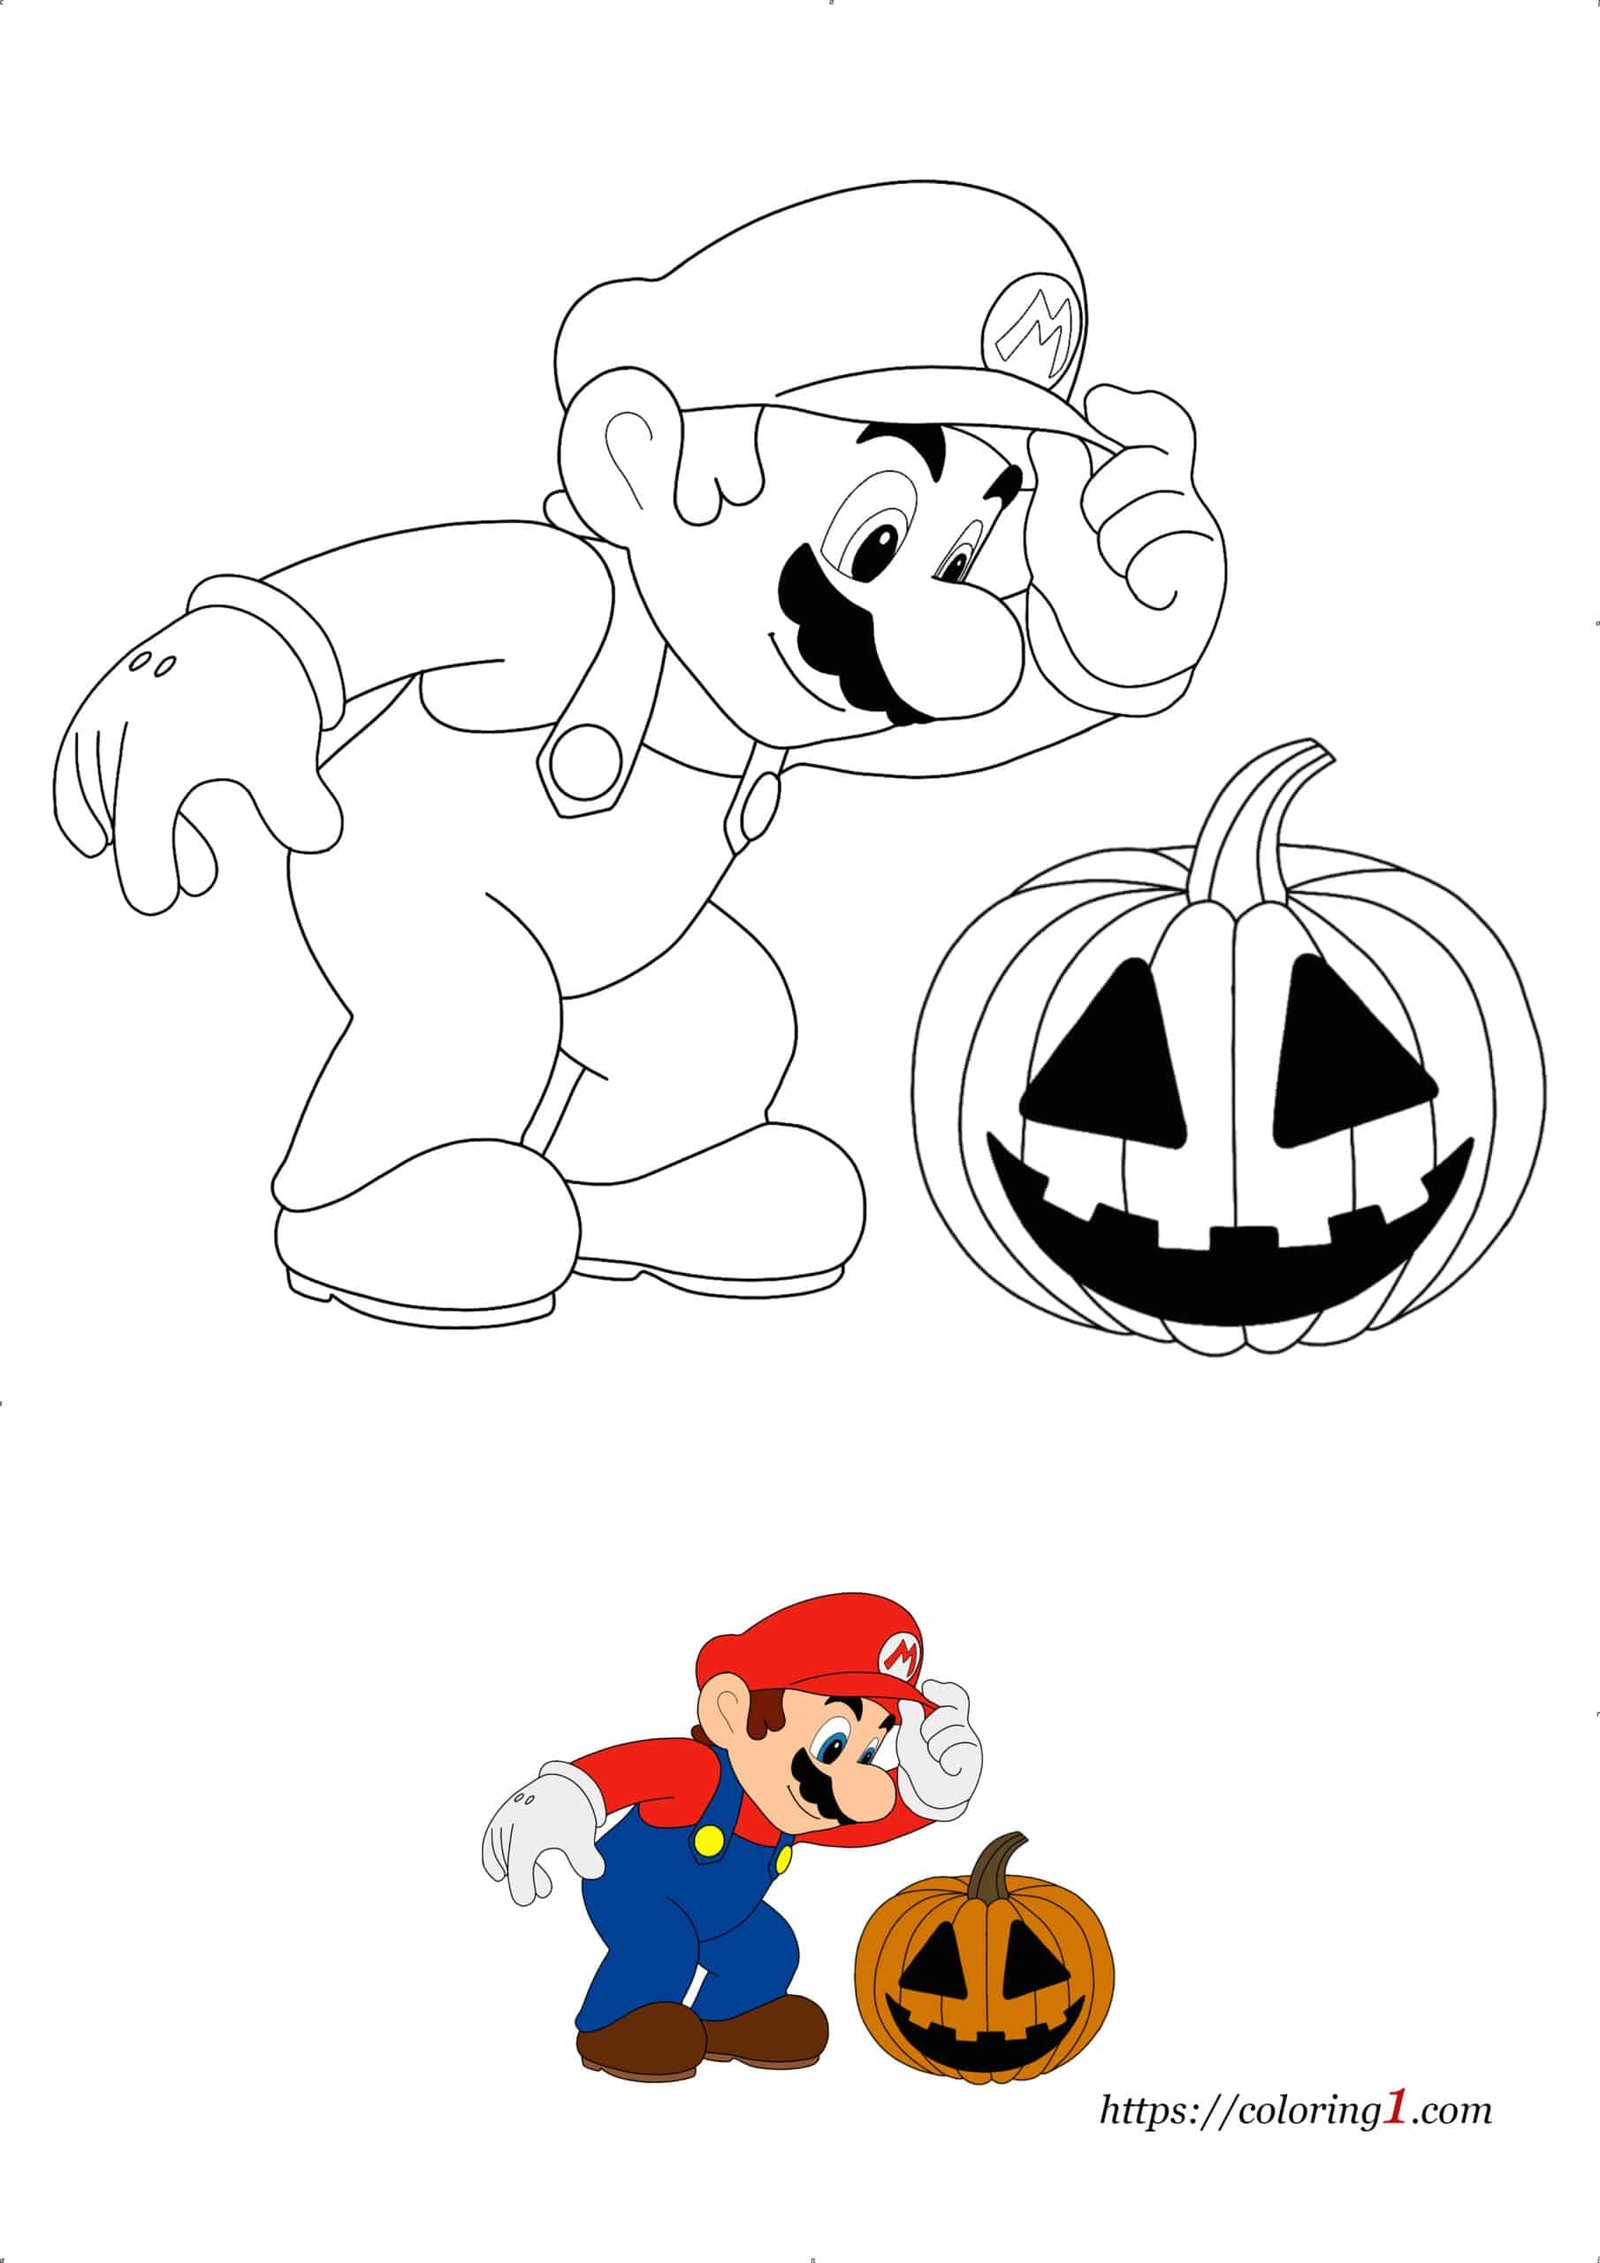 Mario with Pumpkin Halloween coloring page to print for kids and adults